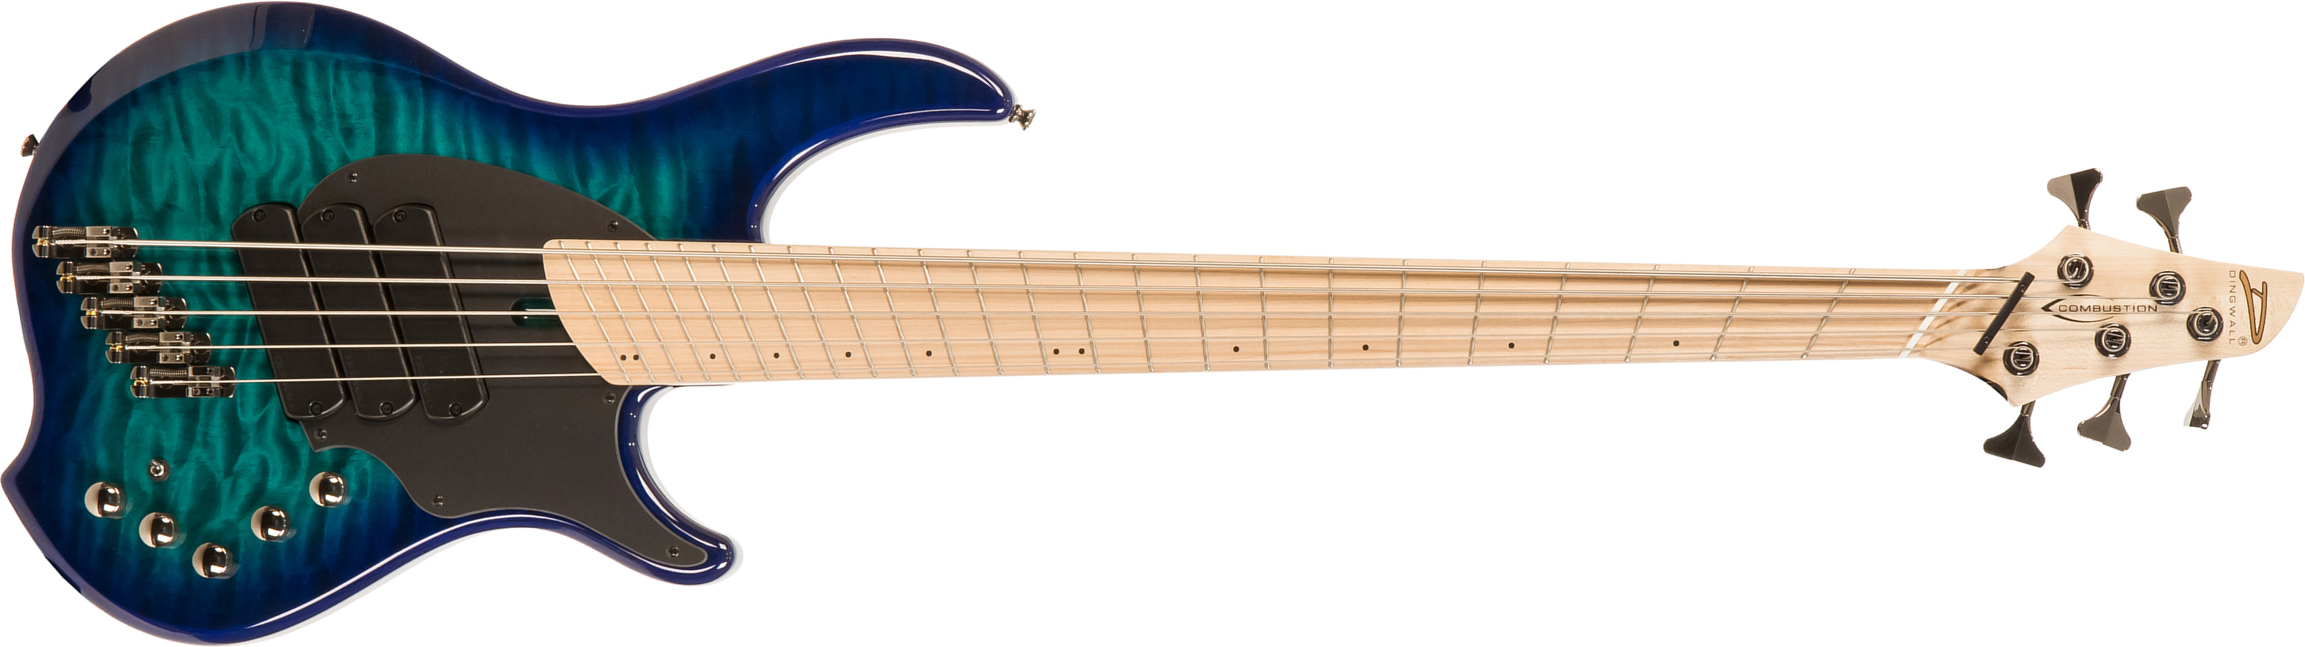 Dingwall Combustion Cb3 5c 3pu Active Mn - Whalepool Burst - Solid body electric bass - Main picture